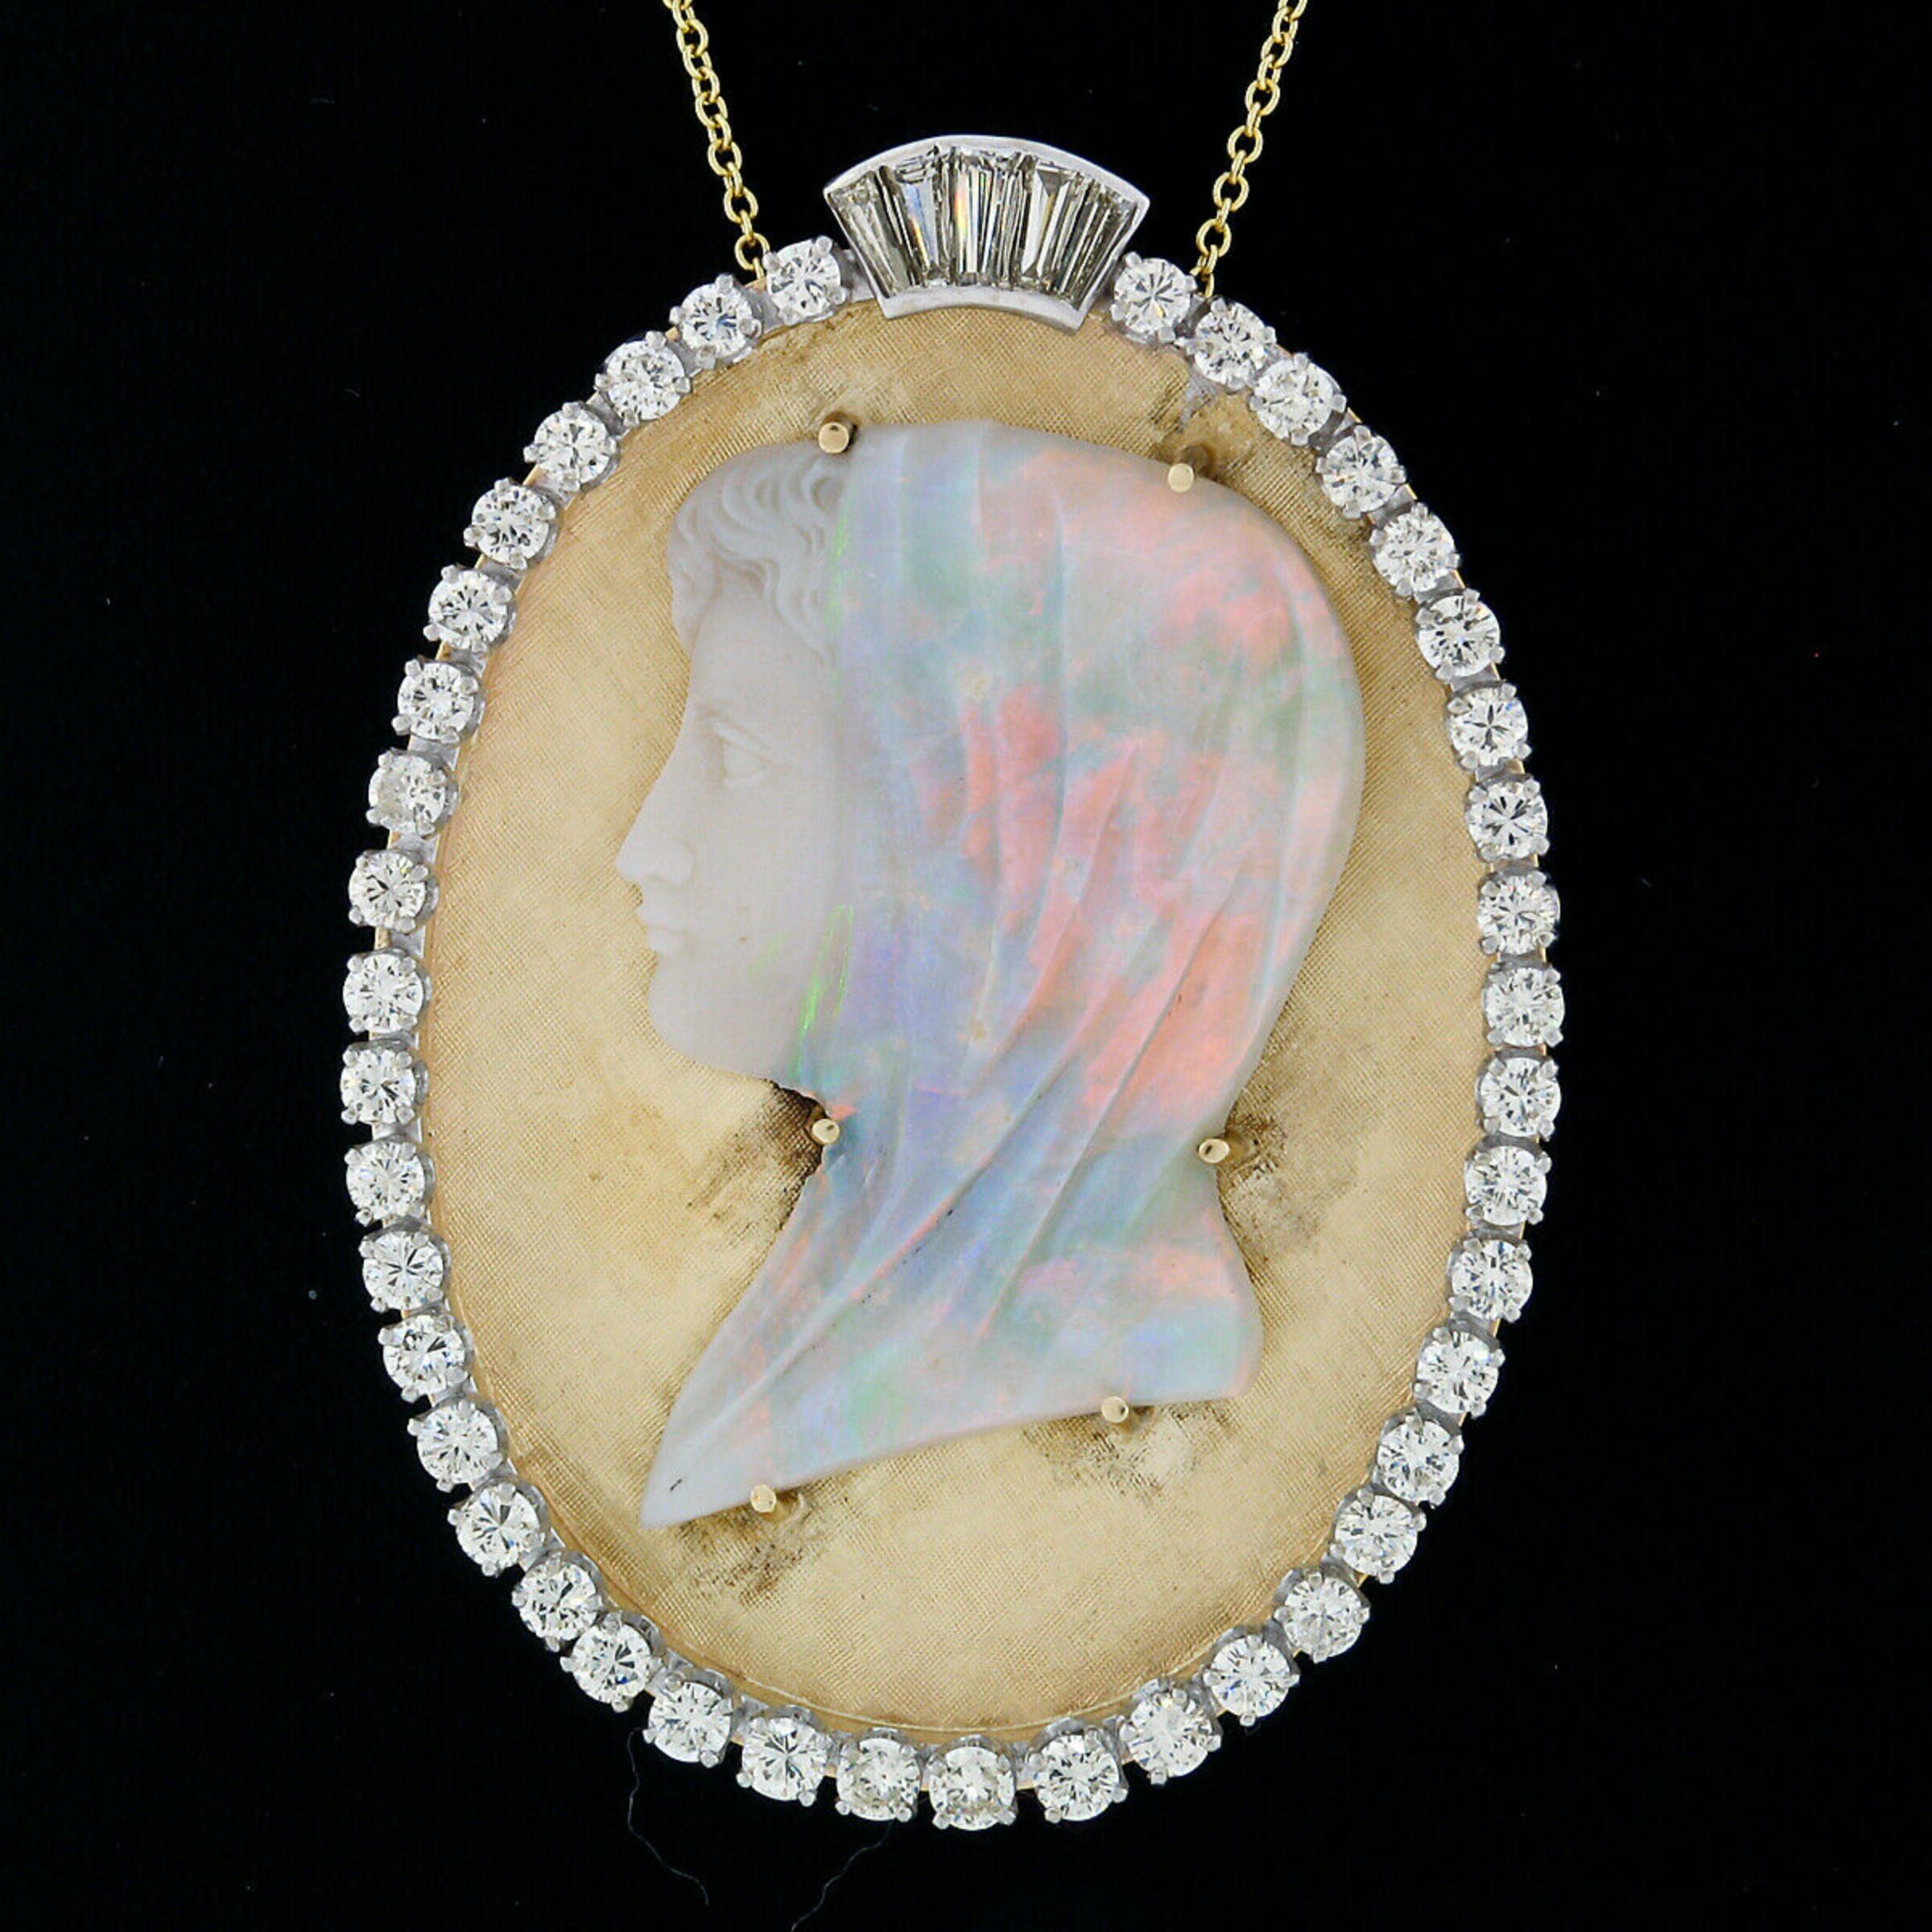 Here we have a large and absolutely stunning vintage pendant that was crafted in solid 14k yellow and white gold. The pendant features a magnificent cameo of a veiled woman which was carved from a single large piece of natural opal. The woman's face